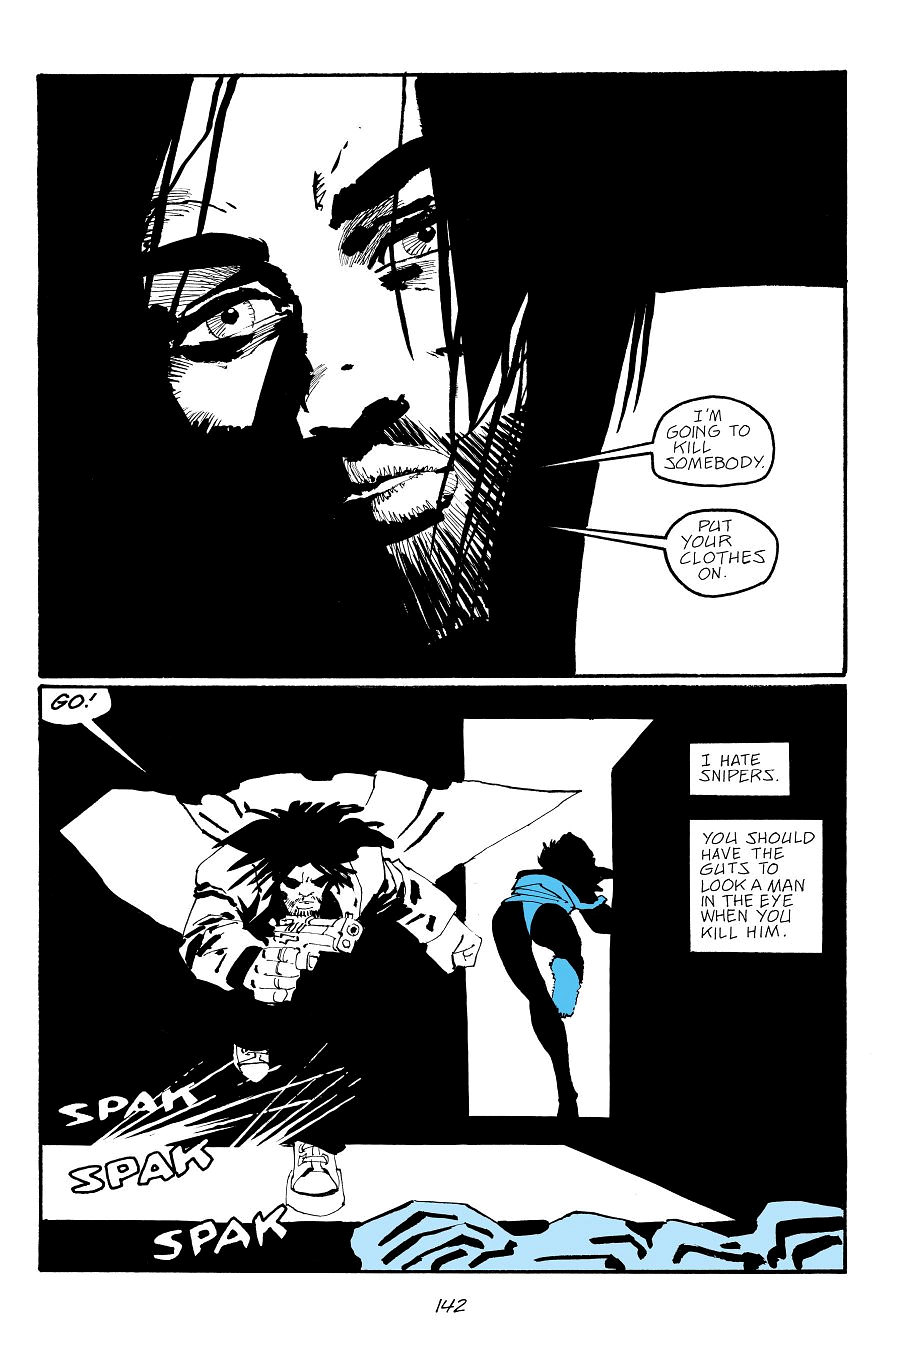 page 142 of sin city 7 hell and back